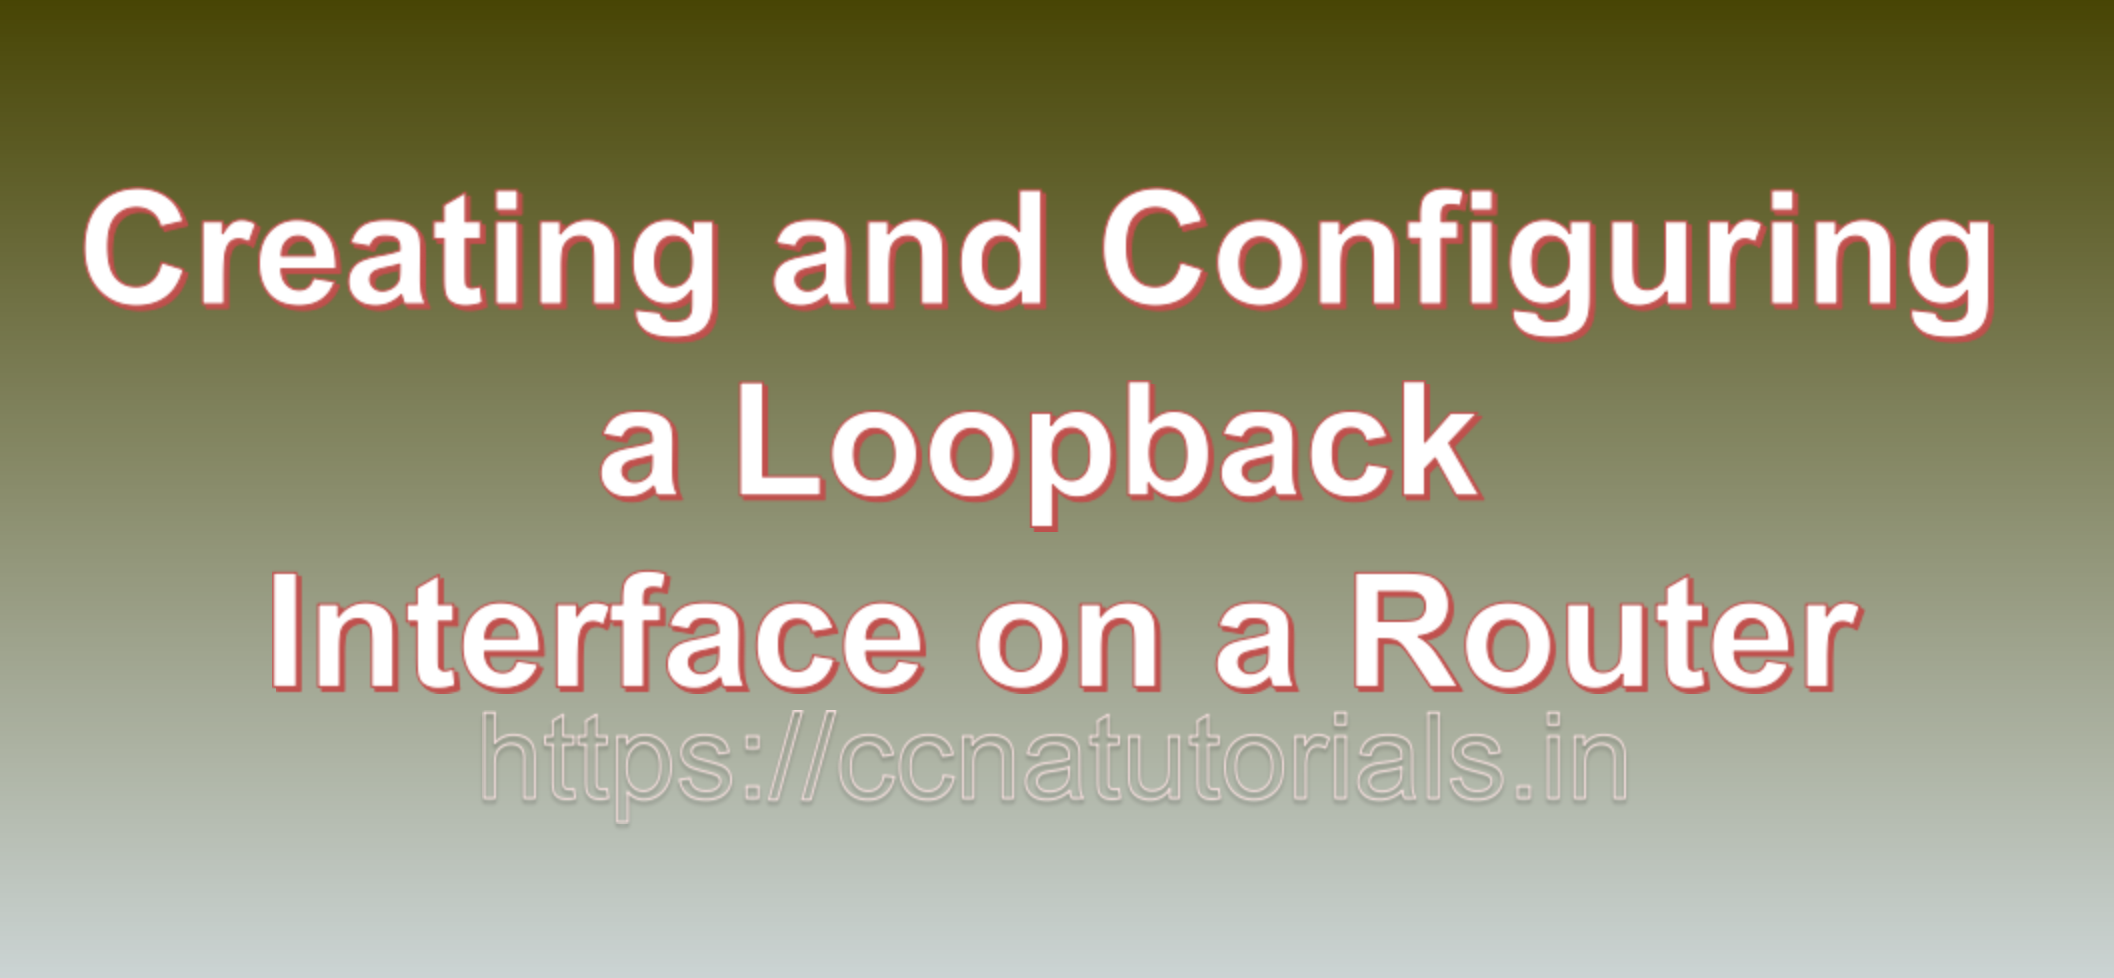 Creating and Configuring a Loopback Interface on a Router, ccna, ccna tutorials